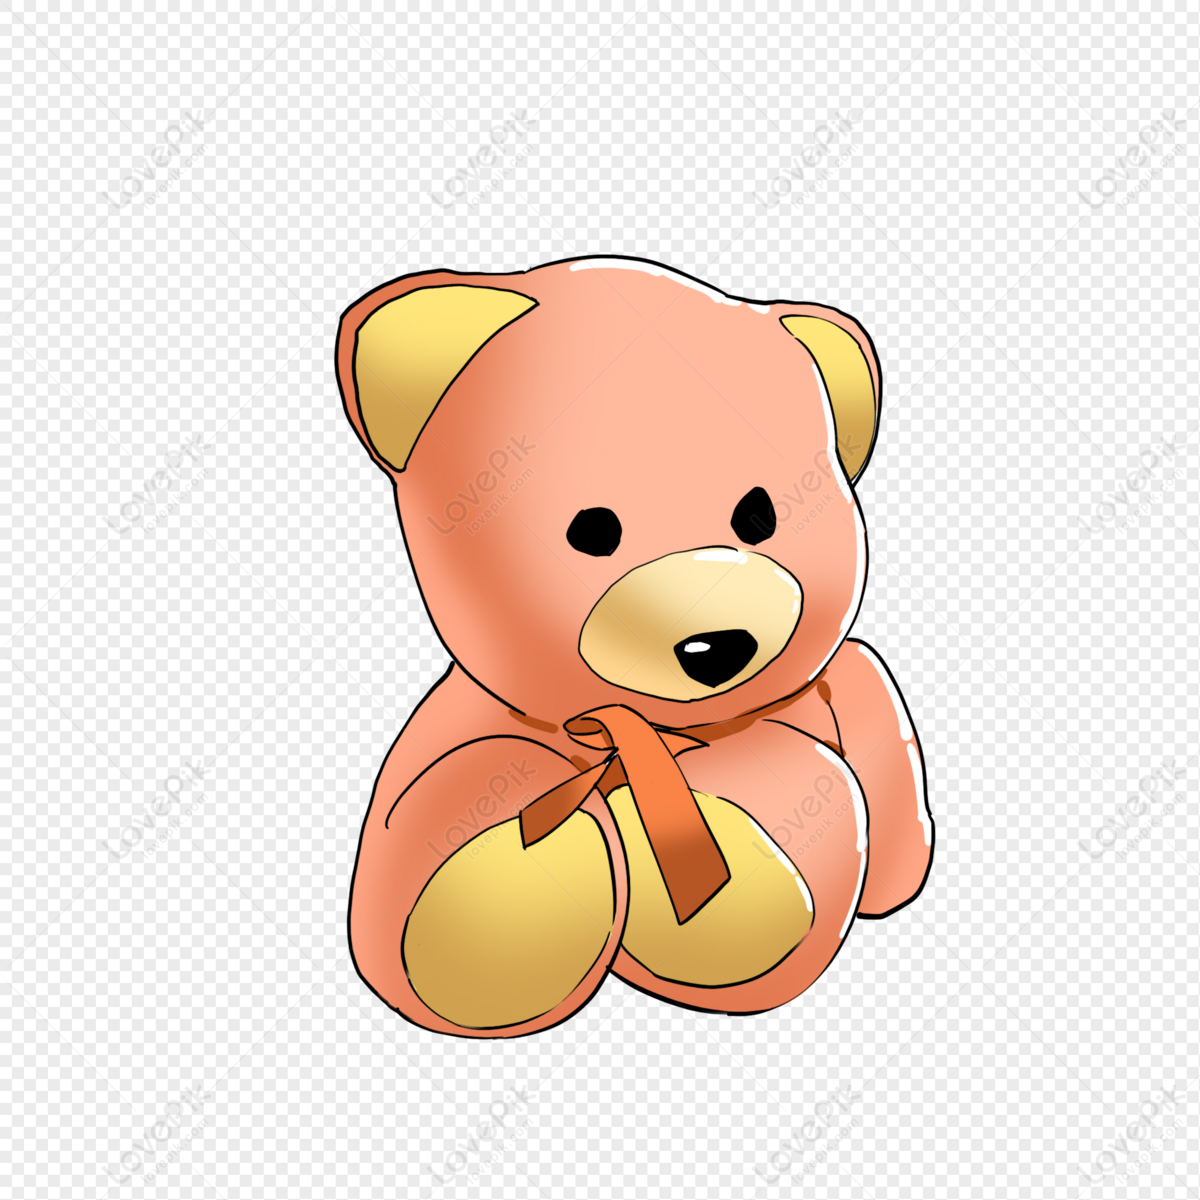 Pink Bear Doll PNG Image Free Download And Clipart Image For Free ...